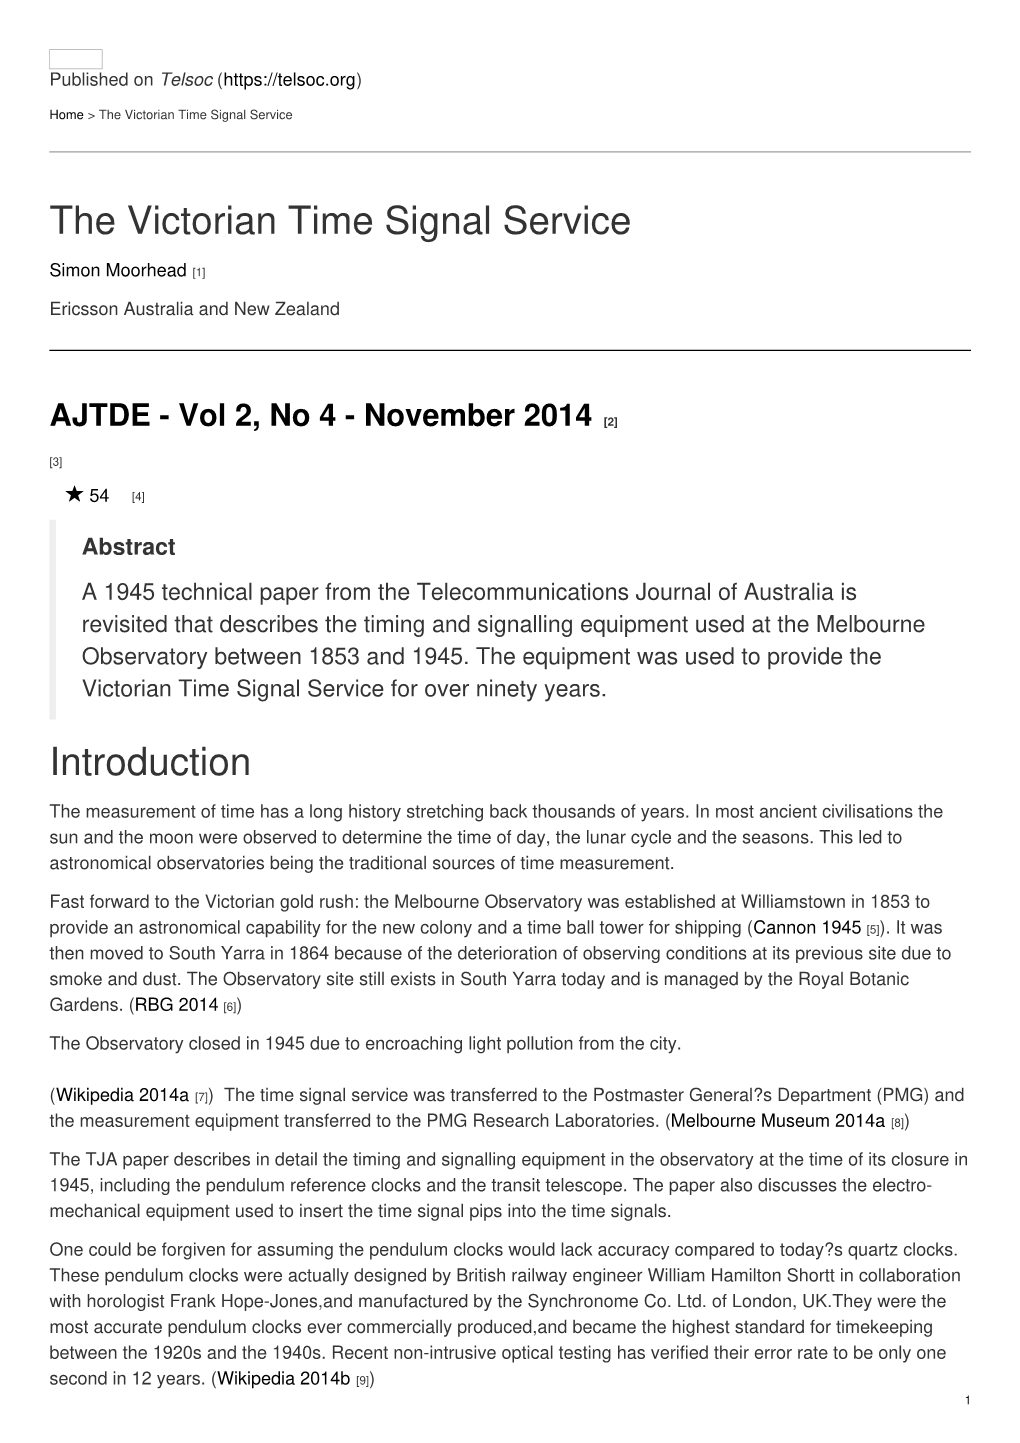 The Victorian Time Signal Service